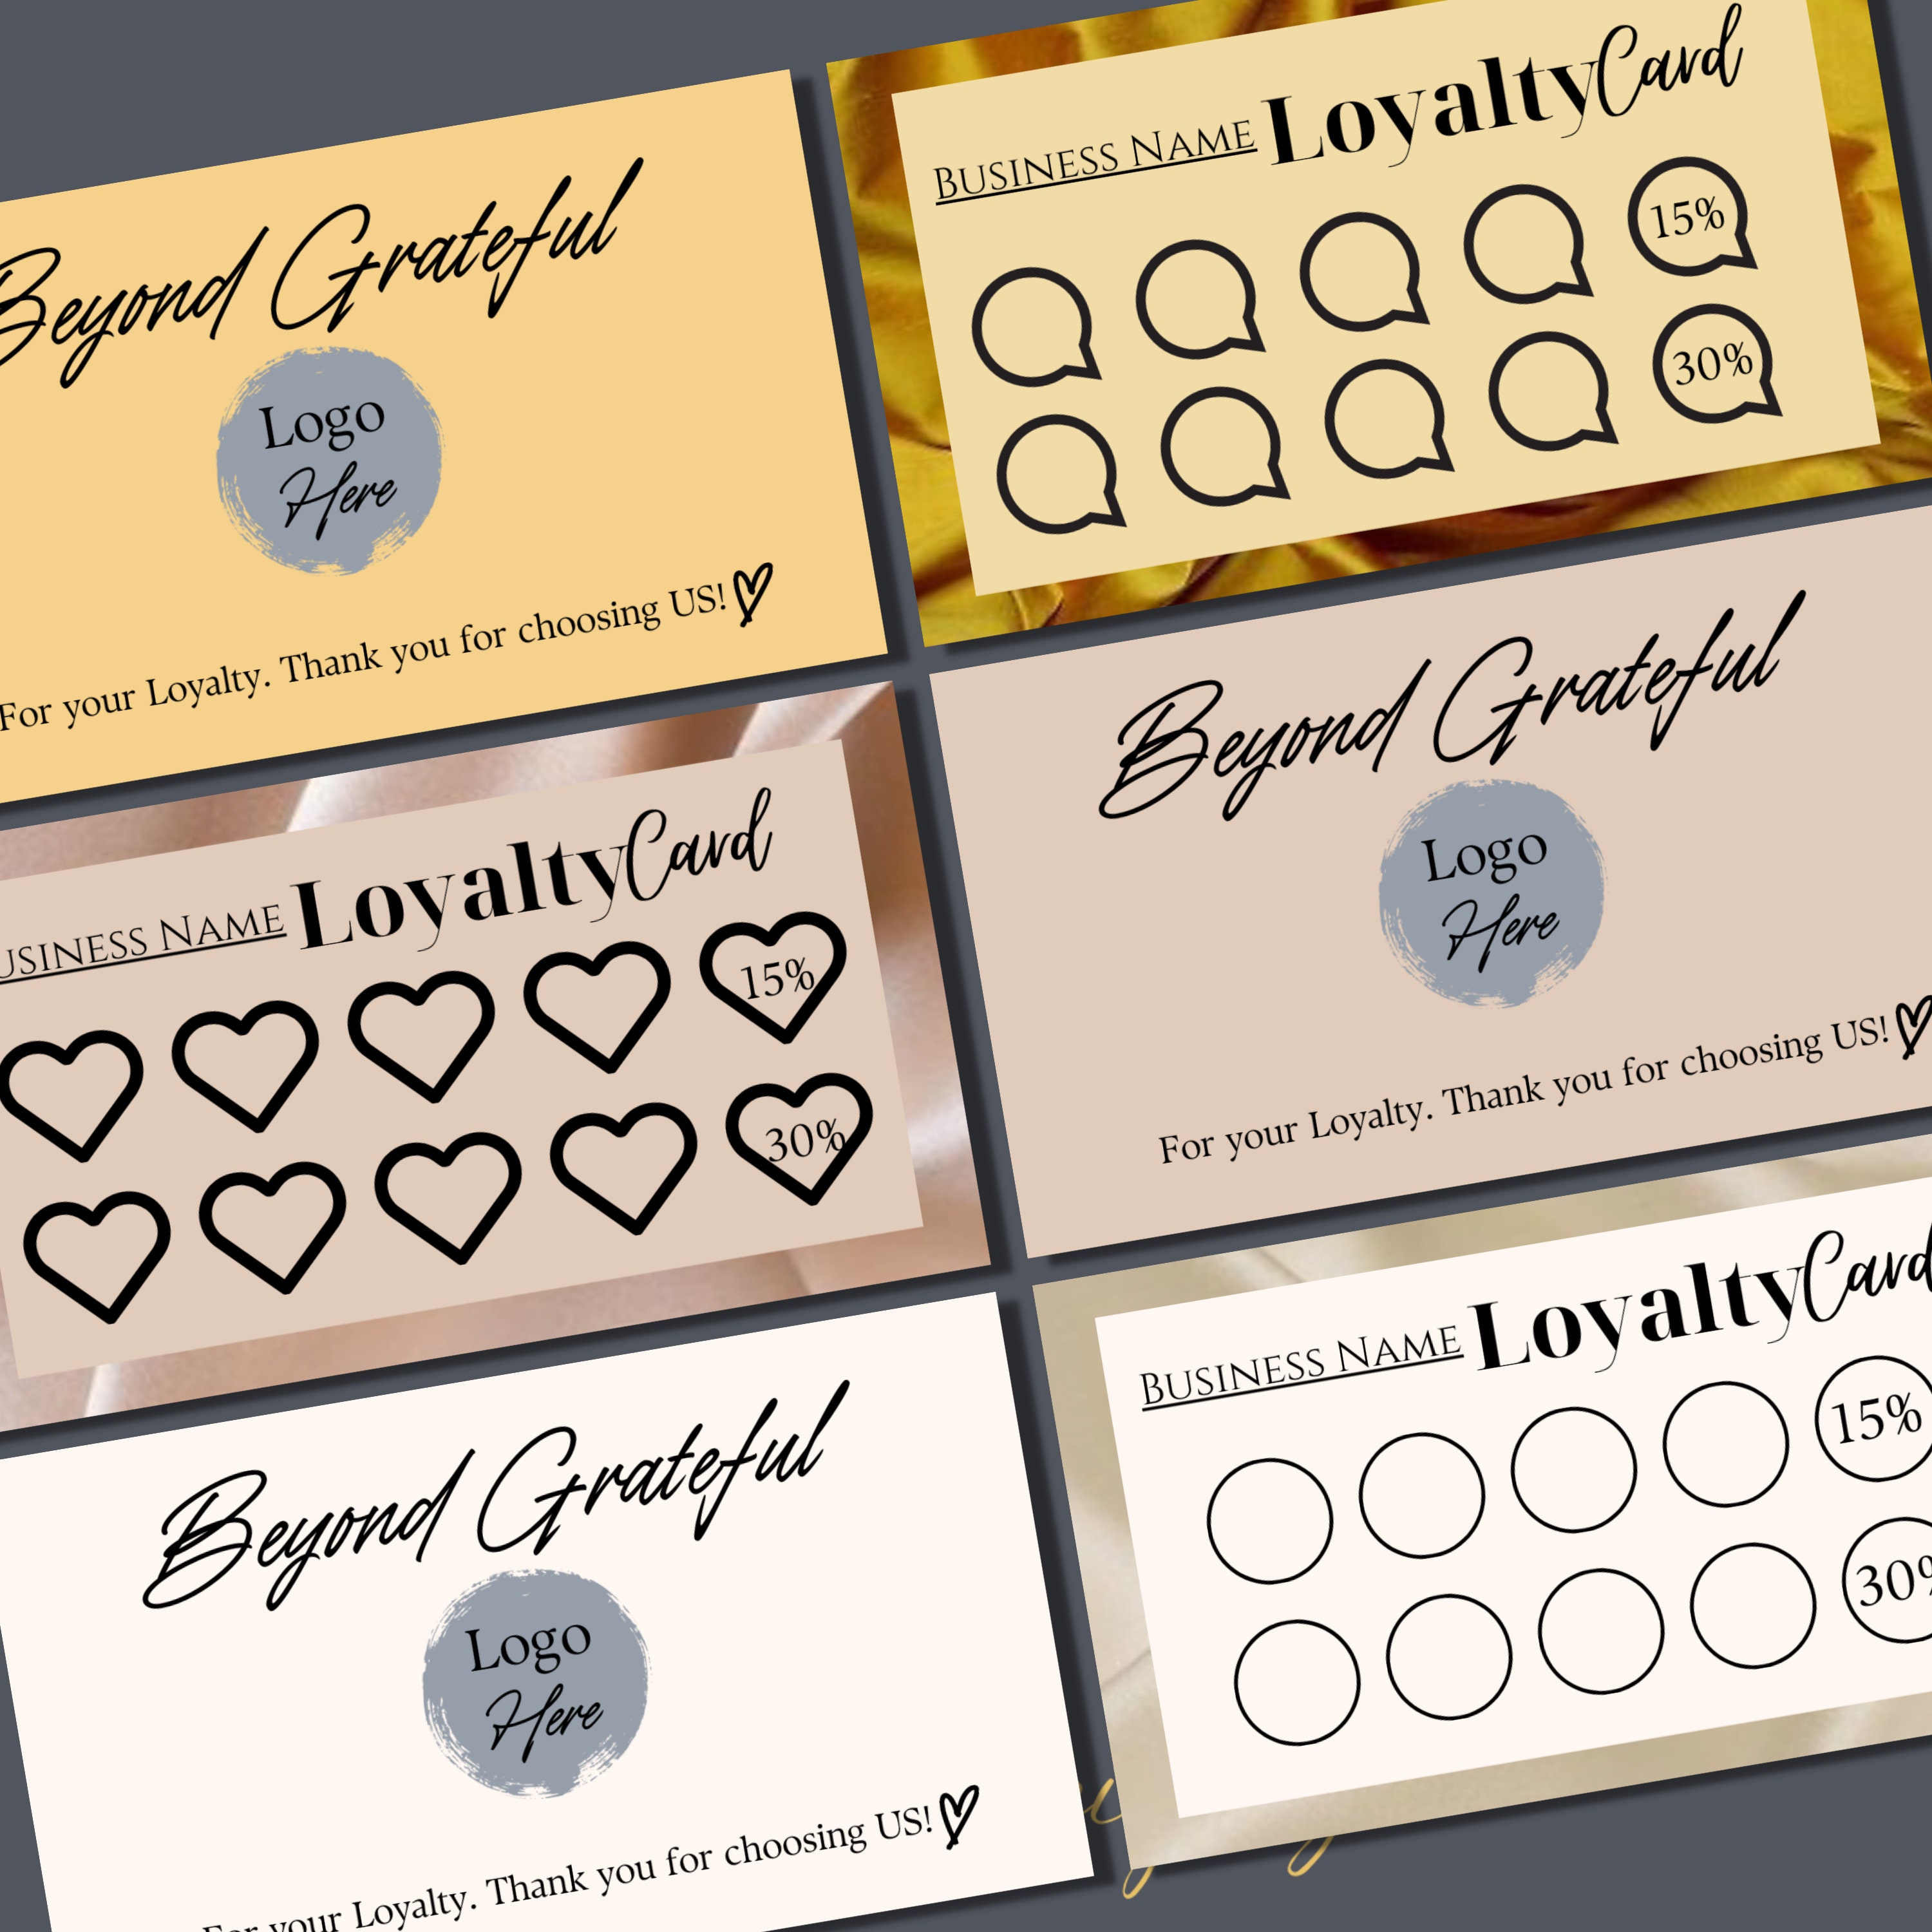 Rewards Punch Card * Small Business Loyalty Card * Set of 50 Cards *  English and Spanish Versions